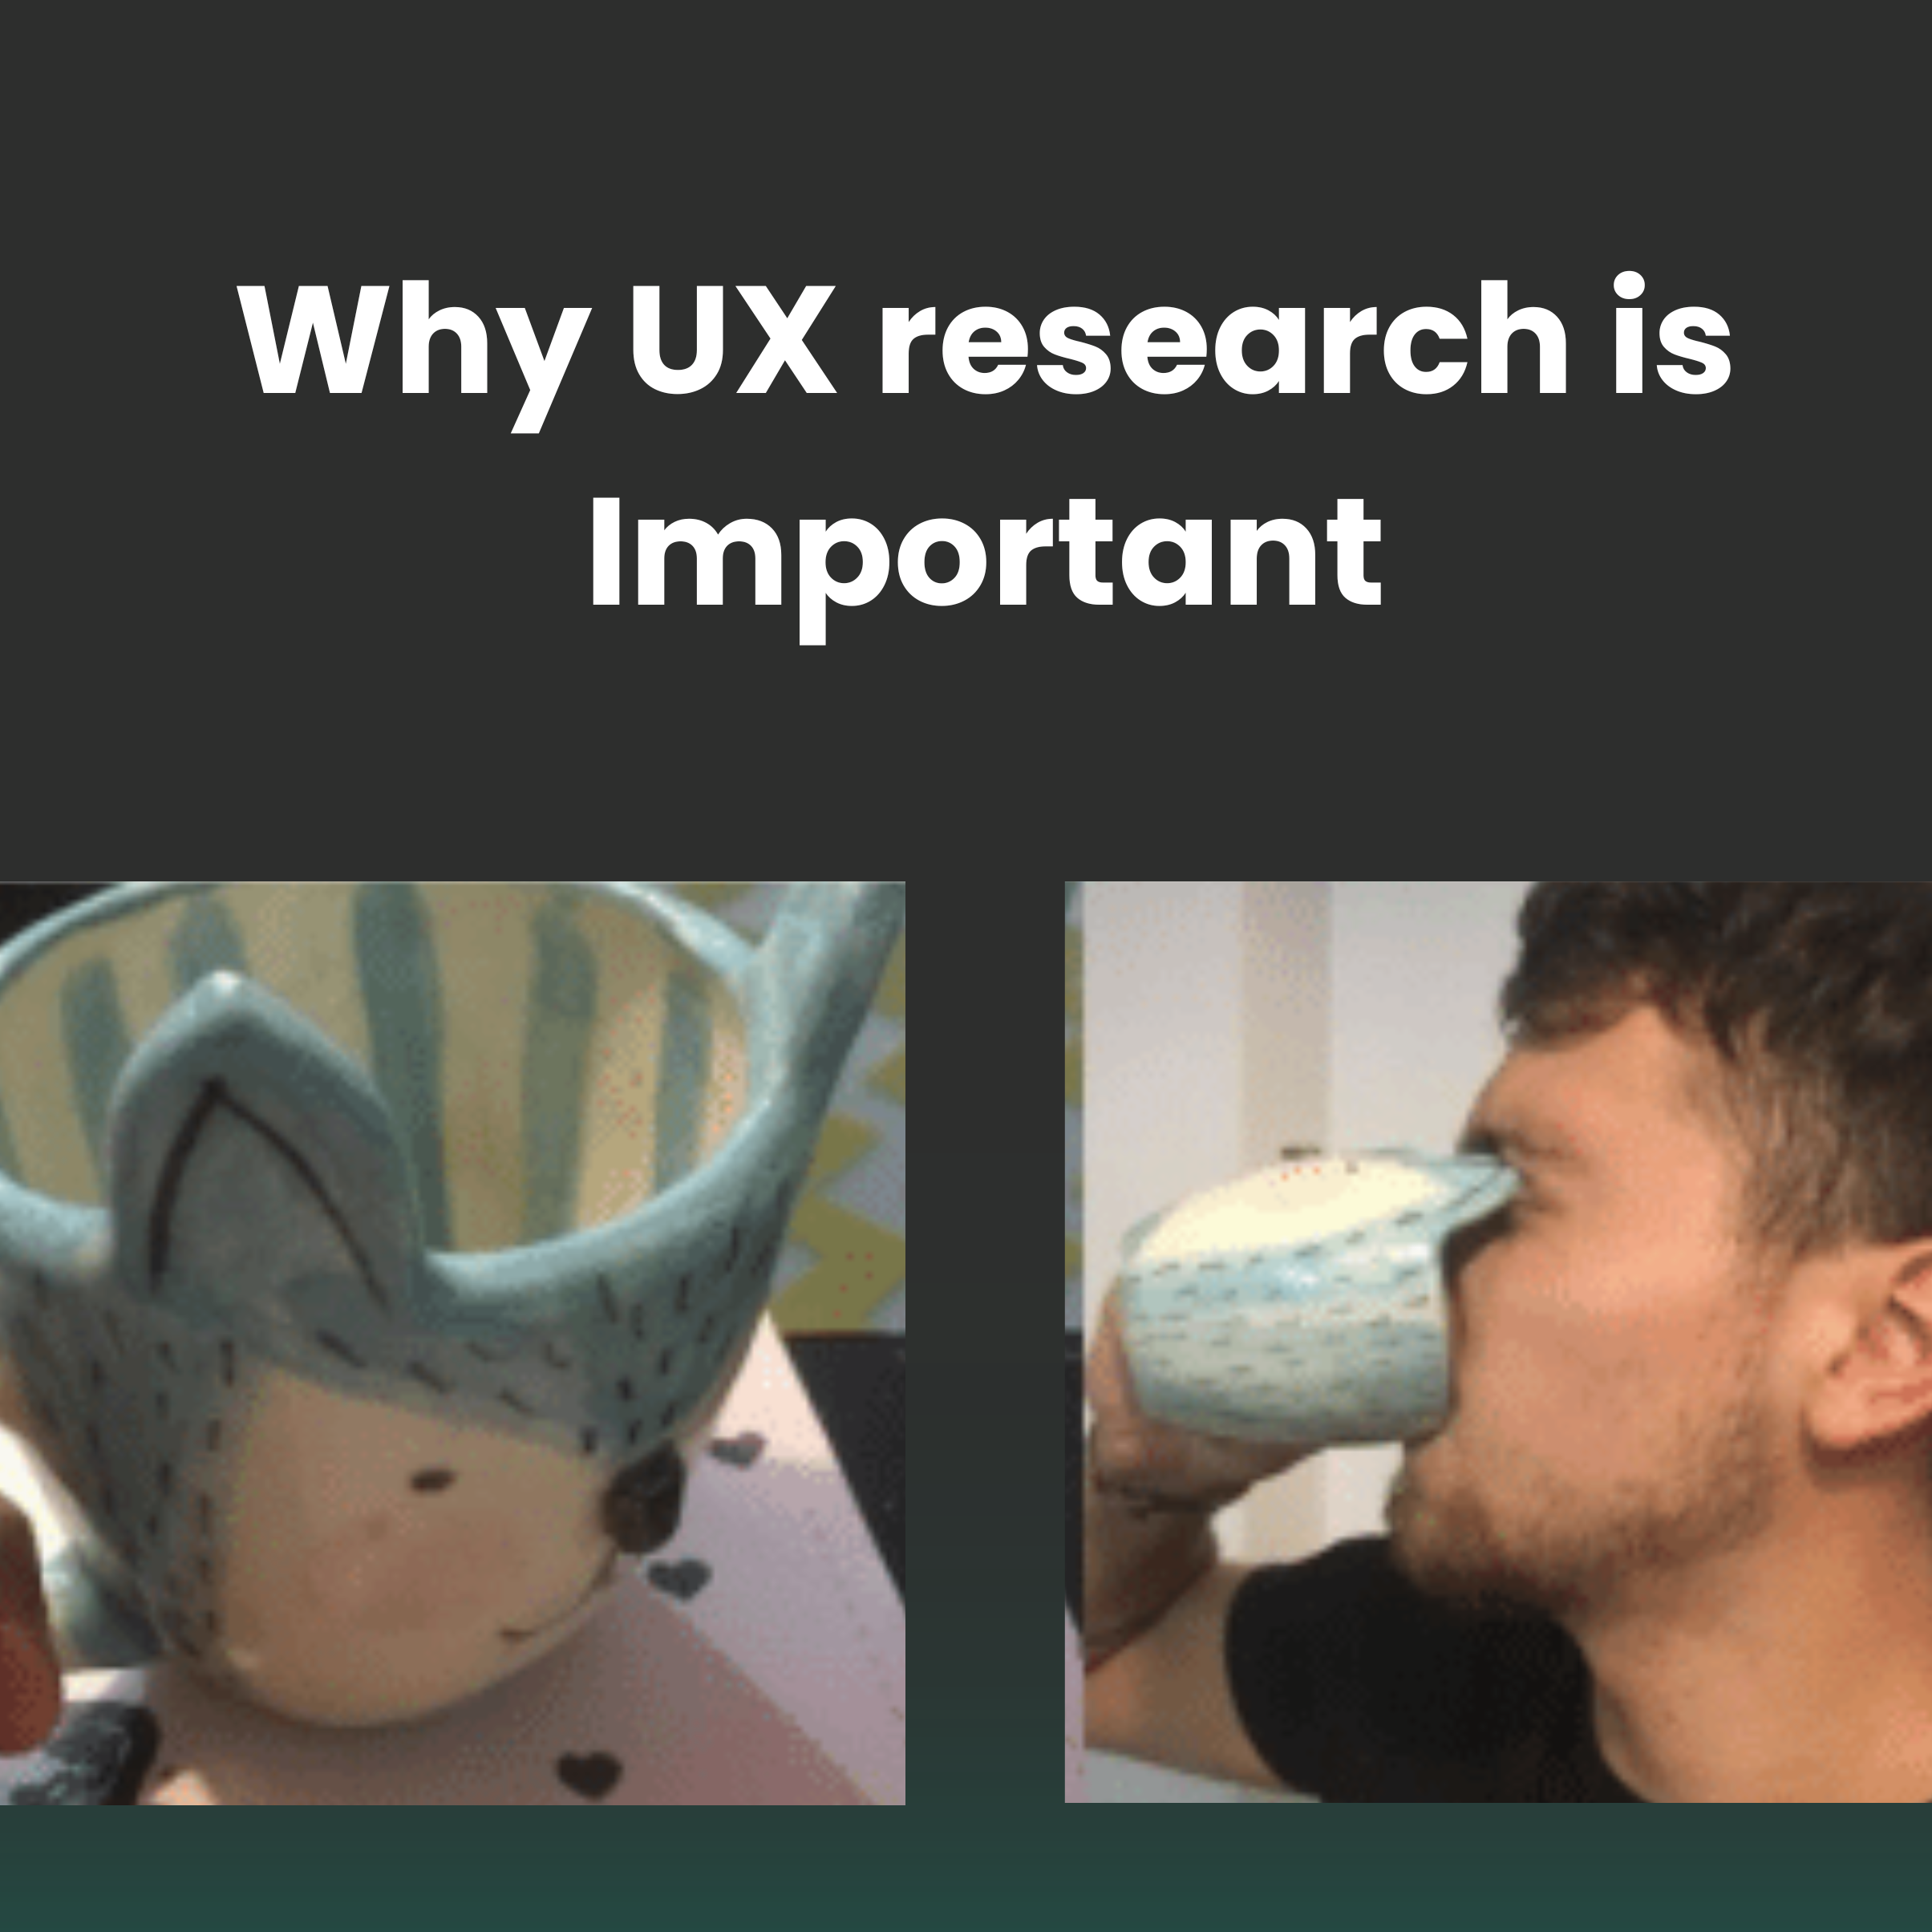 IndieFolio blog: Why is user research important